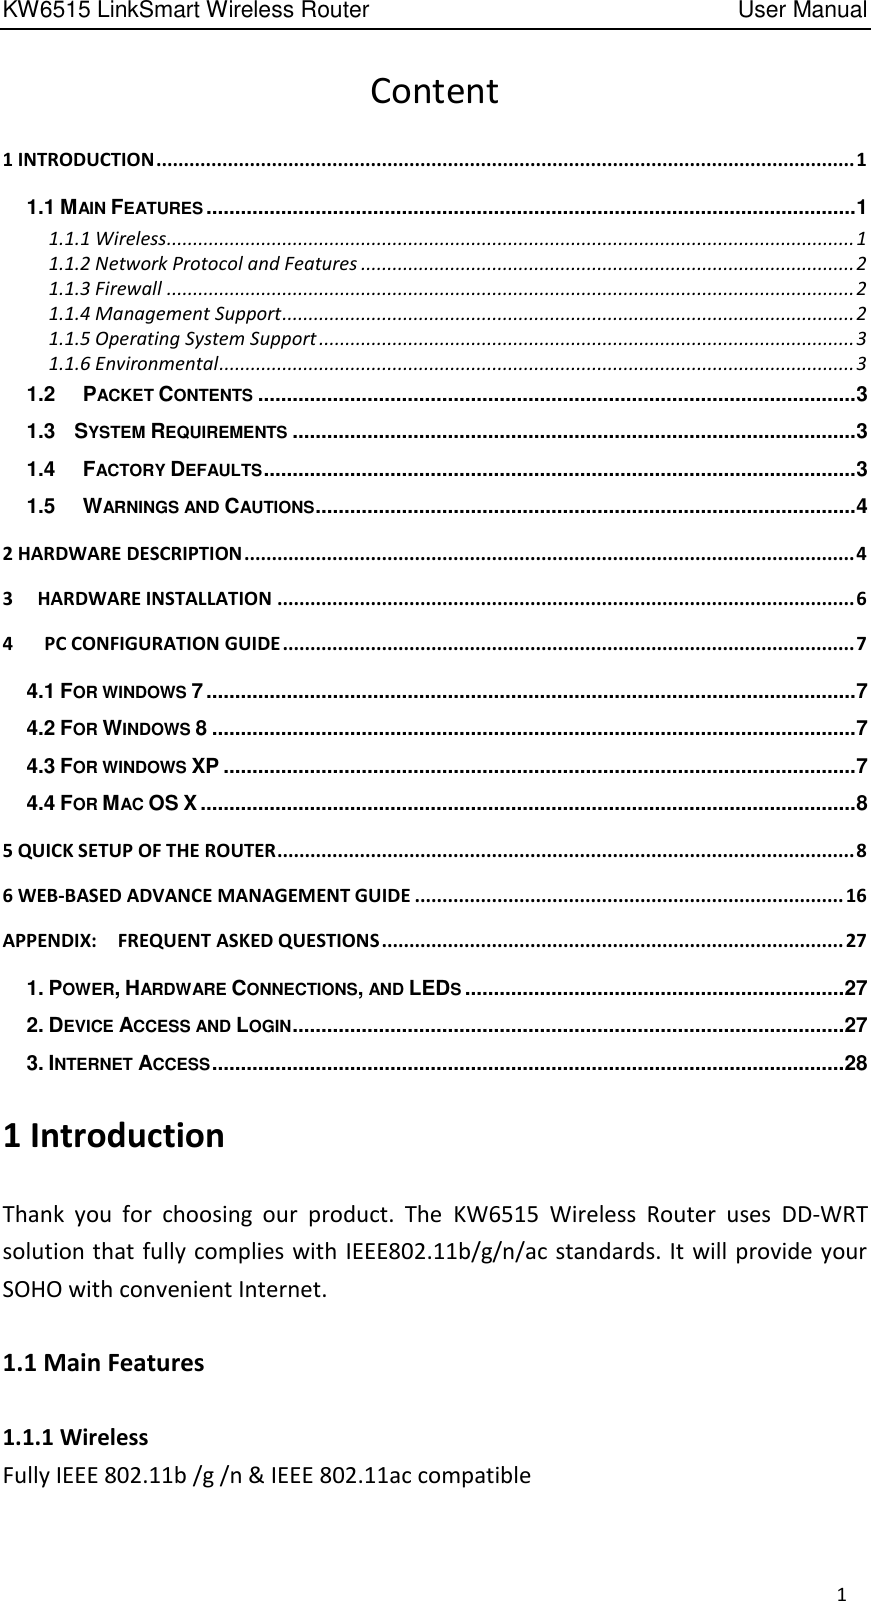 KW6515 LinkSmart Wireless Router         User Manual 1 Content 1 INTRODUCTION ............................................................................................................................... 1 1.1 MAIN FEATURES ................................................................................................................. 1 1.1.1 Wireless................................................................................................................................... 1 1.1.2 Network Protocol and Features .............................................................................................. 2 1.1.3 Firewall ................................................................................................................................... 2 1.1.4 Management Support ............................................................................................................. 2 1.1.5 Operating System Support ...................................................................................................... 3 1.1.6 Environmental ......................................................................................................................... 3 1.2  PACKET CONTENTS ........................................................................................................ 3 1.3 SYSTEM REQUIREMENTS .................................................................................................. 3 1.4  FACTORY DEFAULTS ....................................................................................................... 3 1.5  WARNINGS AND CAUTIONS .............................................................................................. 4 2 HARDWARE DESCRIPTION ............................................................................................................... 4 3 HARDWARE INSTALLATION ......................................................................................................... 6 4      PC CONFIGURATION GUIDE ........................................................................................................ 7 4.1 FOR WINDOWS 7 ................................................................................................................. 7 4.2 FOR WINDOWS 8 ................................................................................................................ 7 4.3 FOR WINDOWS XP .............................................................................................................. 7 4.4 FOR MAC OS X .................................................................................................................. 8 5 QUICK SETUP OF THE ROUTER ......................................................................................................... 8 6 WEB-BASED ADVANCE MANAGEMENT GUIDE .............................................................................. 16 APPENDIX:    FREQUENT ASKED QUESTIONS .................................................................................... 27 1. POWER, HARDWARE CONNECTIONS, AND LEDS .................................................................. 27 2. DEVICE ACCESS AND LOGIN ................................................................................................ 27 3. INTERNET ACCESS .............................................................................................................. 28 1 Introduction Thank  you  for  choosing  our  product.  The  KW6515  Wireless  Router  uses  DD-WRT solution that fully complies with IEEE802.11b/g/n/ac standards. It will provide your SOHO with convenient Internet. 1.1 Main Features 1.1.1 Wireless Fully IEEE 802.11b /g /n &amp; IEEE 802.11ac compatible 